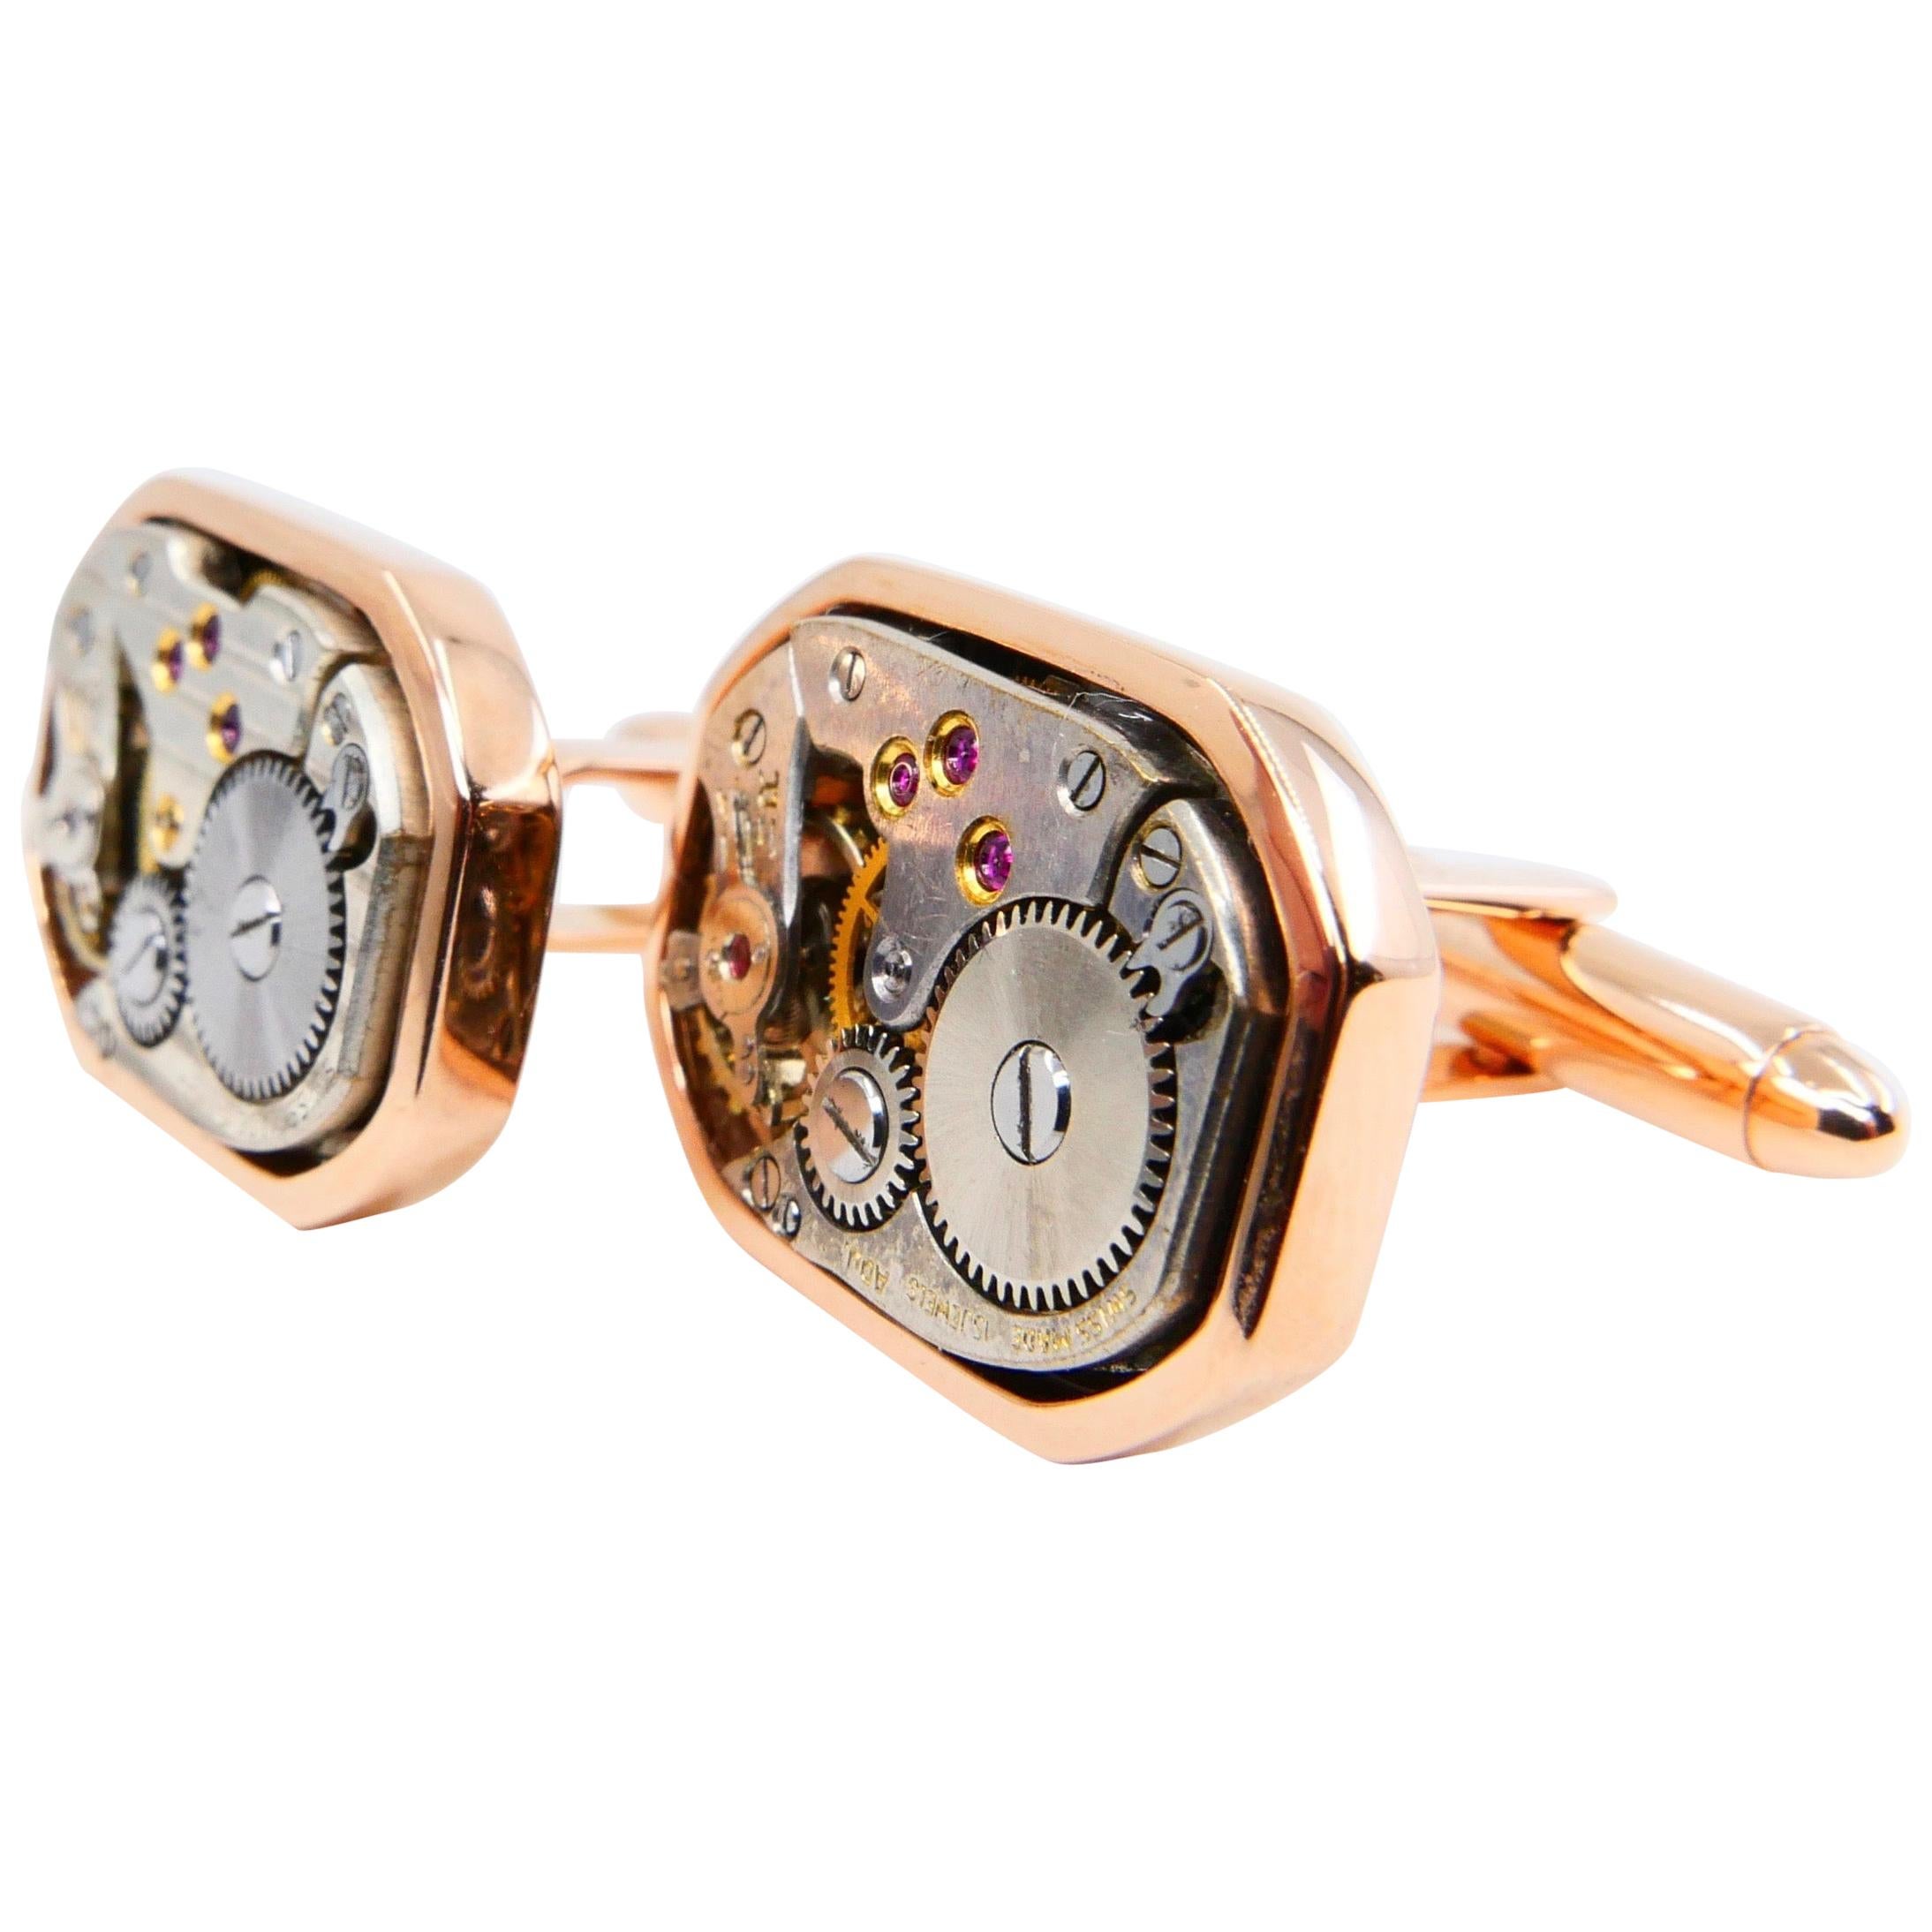 Men's Solid 18 Karat Gold Octagonal Cufflinks with Mechanical Watch Movements In New Condition For Sale In Hong Kong, HK